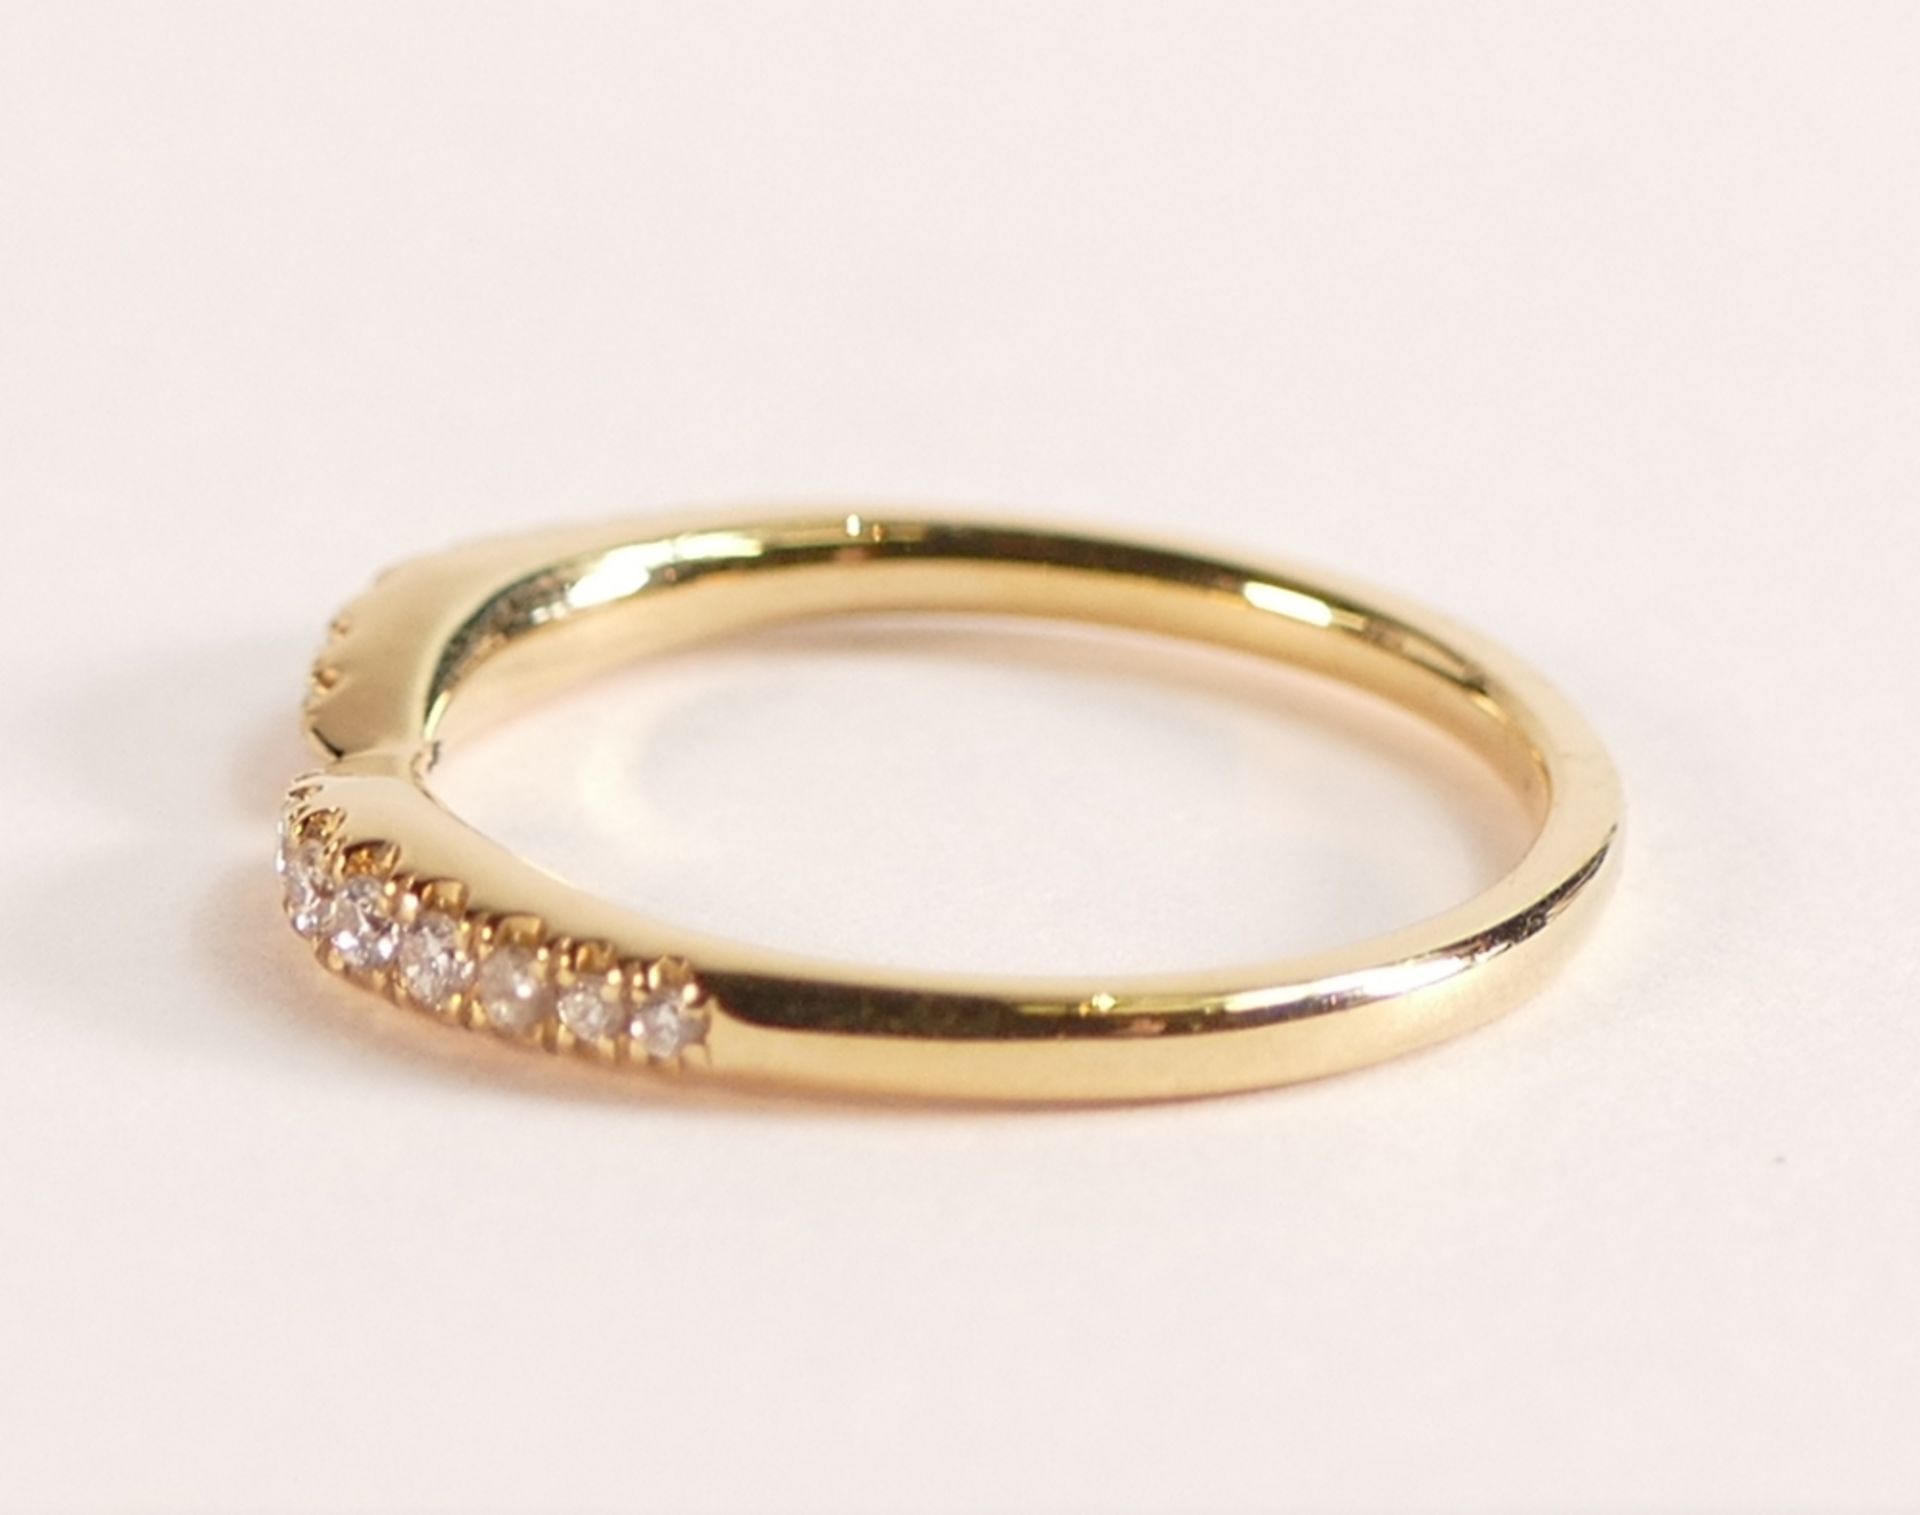 ROX 18ct Yellow Gold Diamond Bow Stacking Ring, approx carat weight is 0.20ct, size M, weight 2.4g. - Image 2 of 3